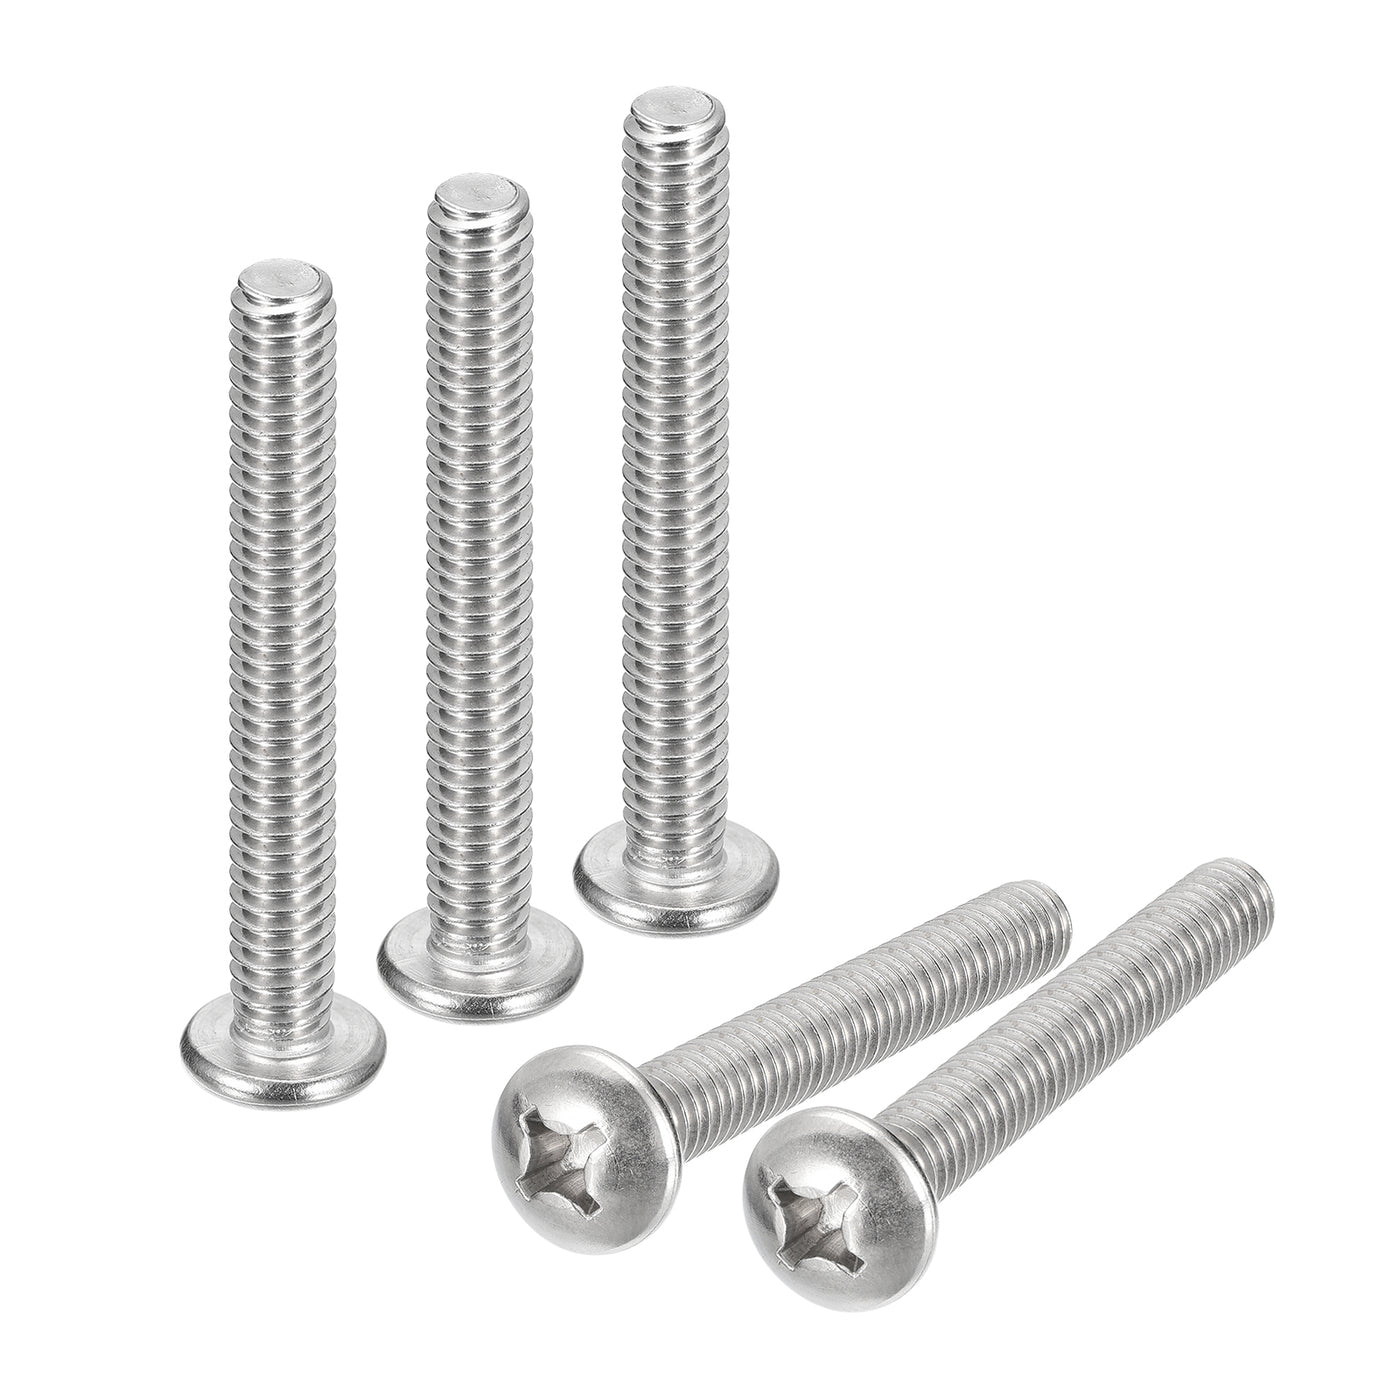 uxcell Uxcell 1/4-20x2" Pan Head Machine Screws, Stainless Steel 18-8 Screw, Pack of 50